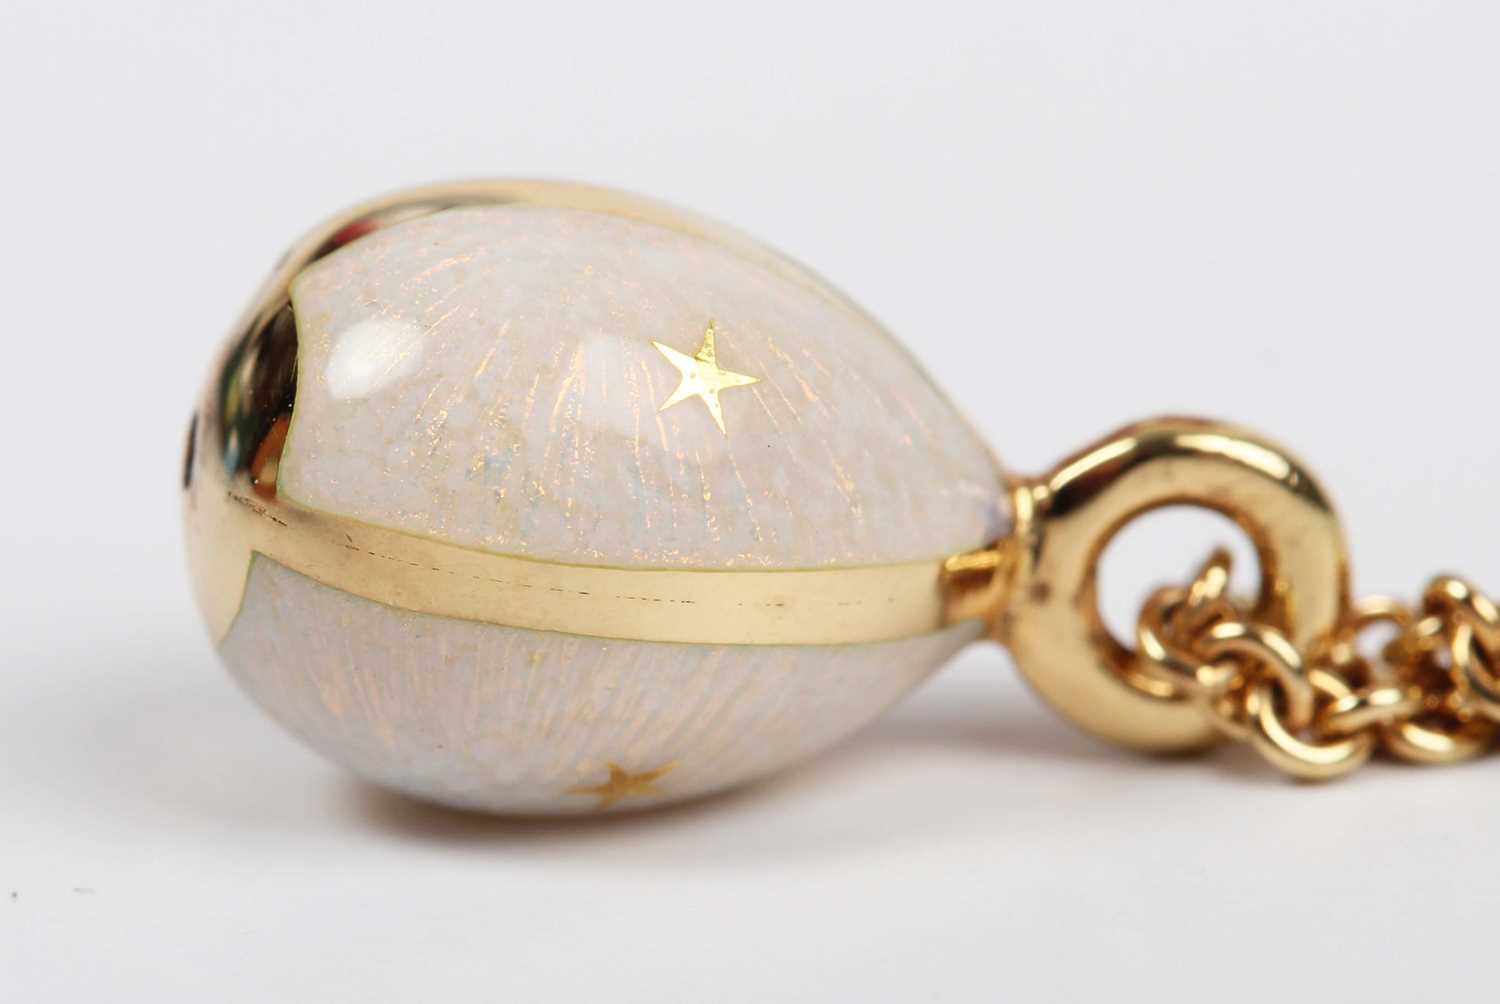 A modern Fabergé gold and semitranslucent pink enamelled egg pendant, decorated with gold stars, - Image 4 of 6